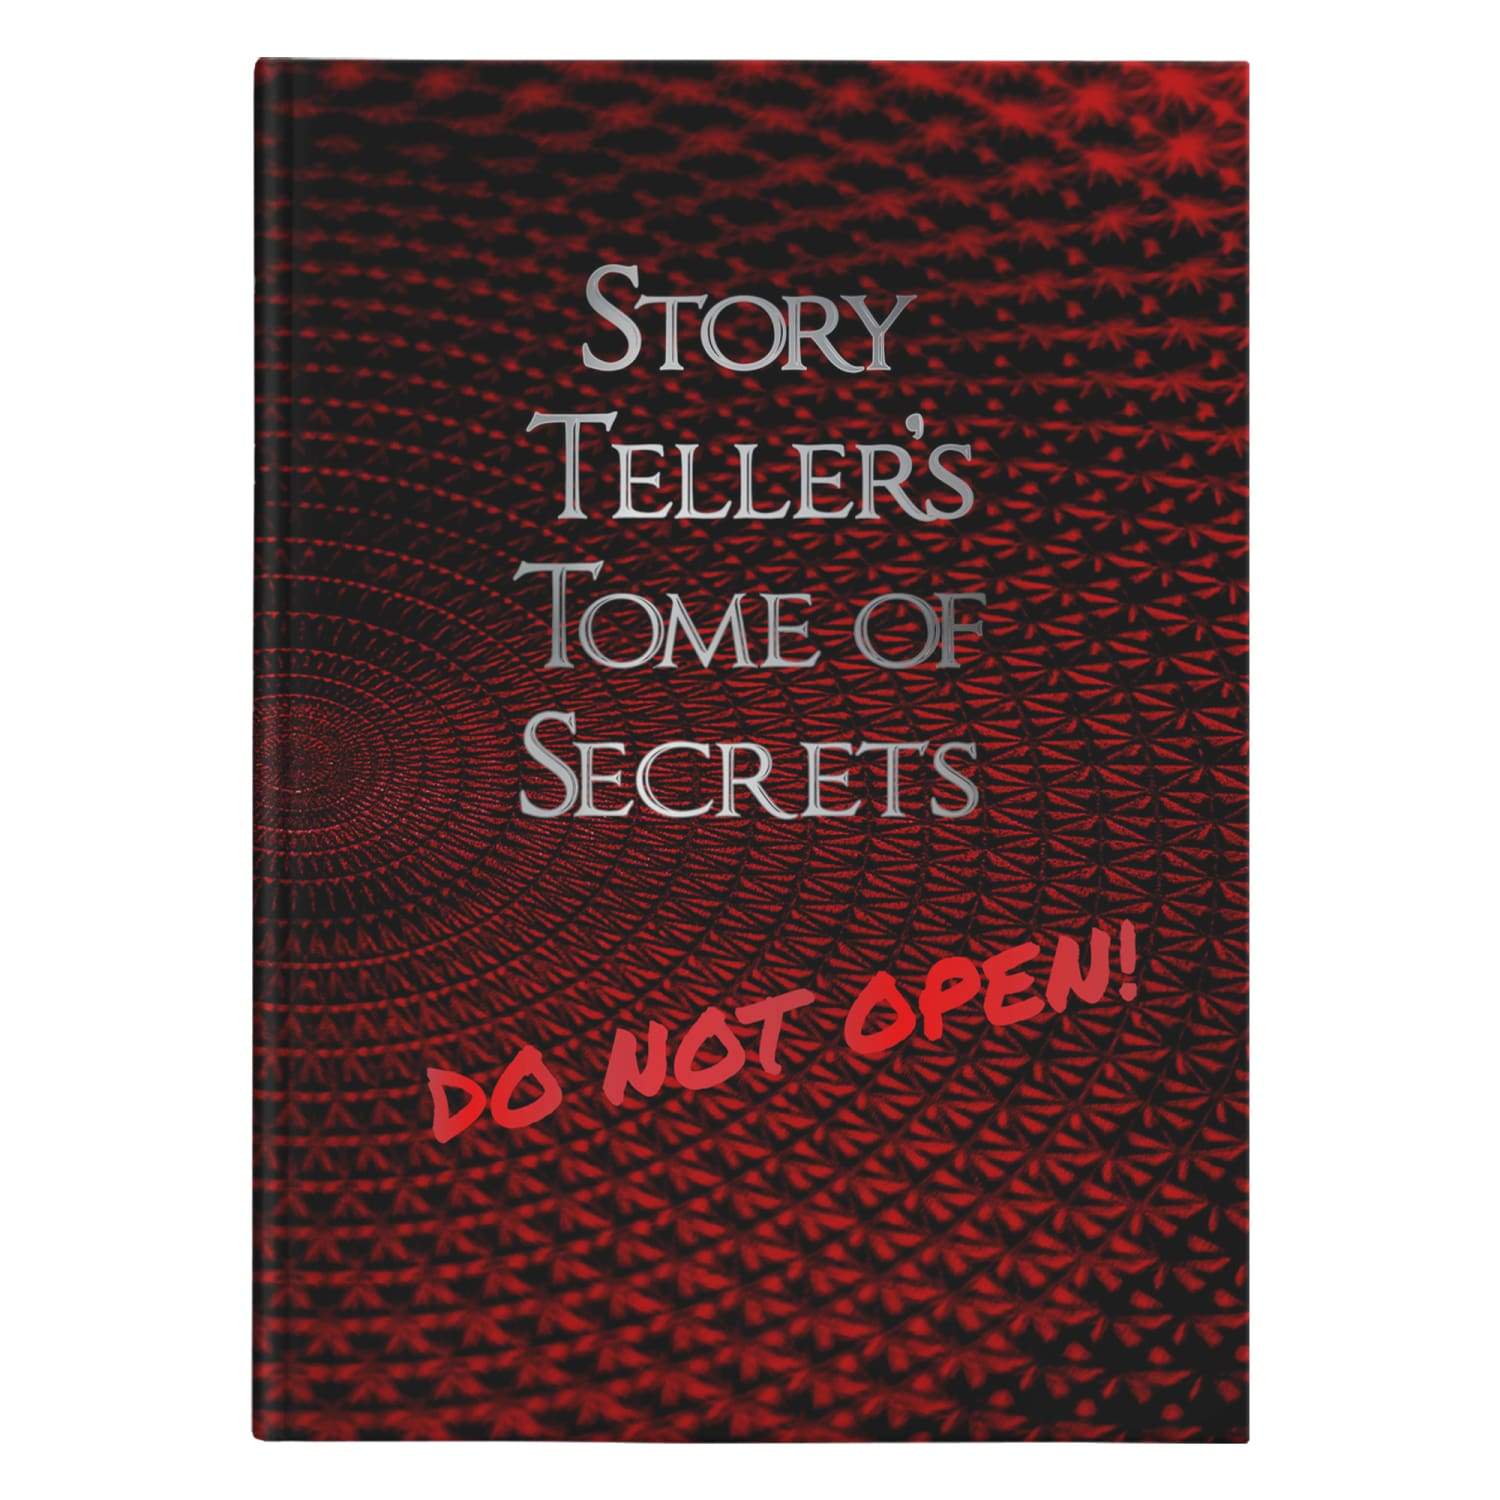 Story Teller’s Tome of Secrets Hardcover Journal - Small (5.75 x 8) - Journals